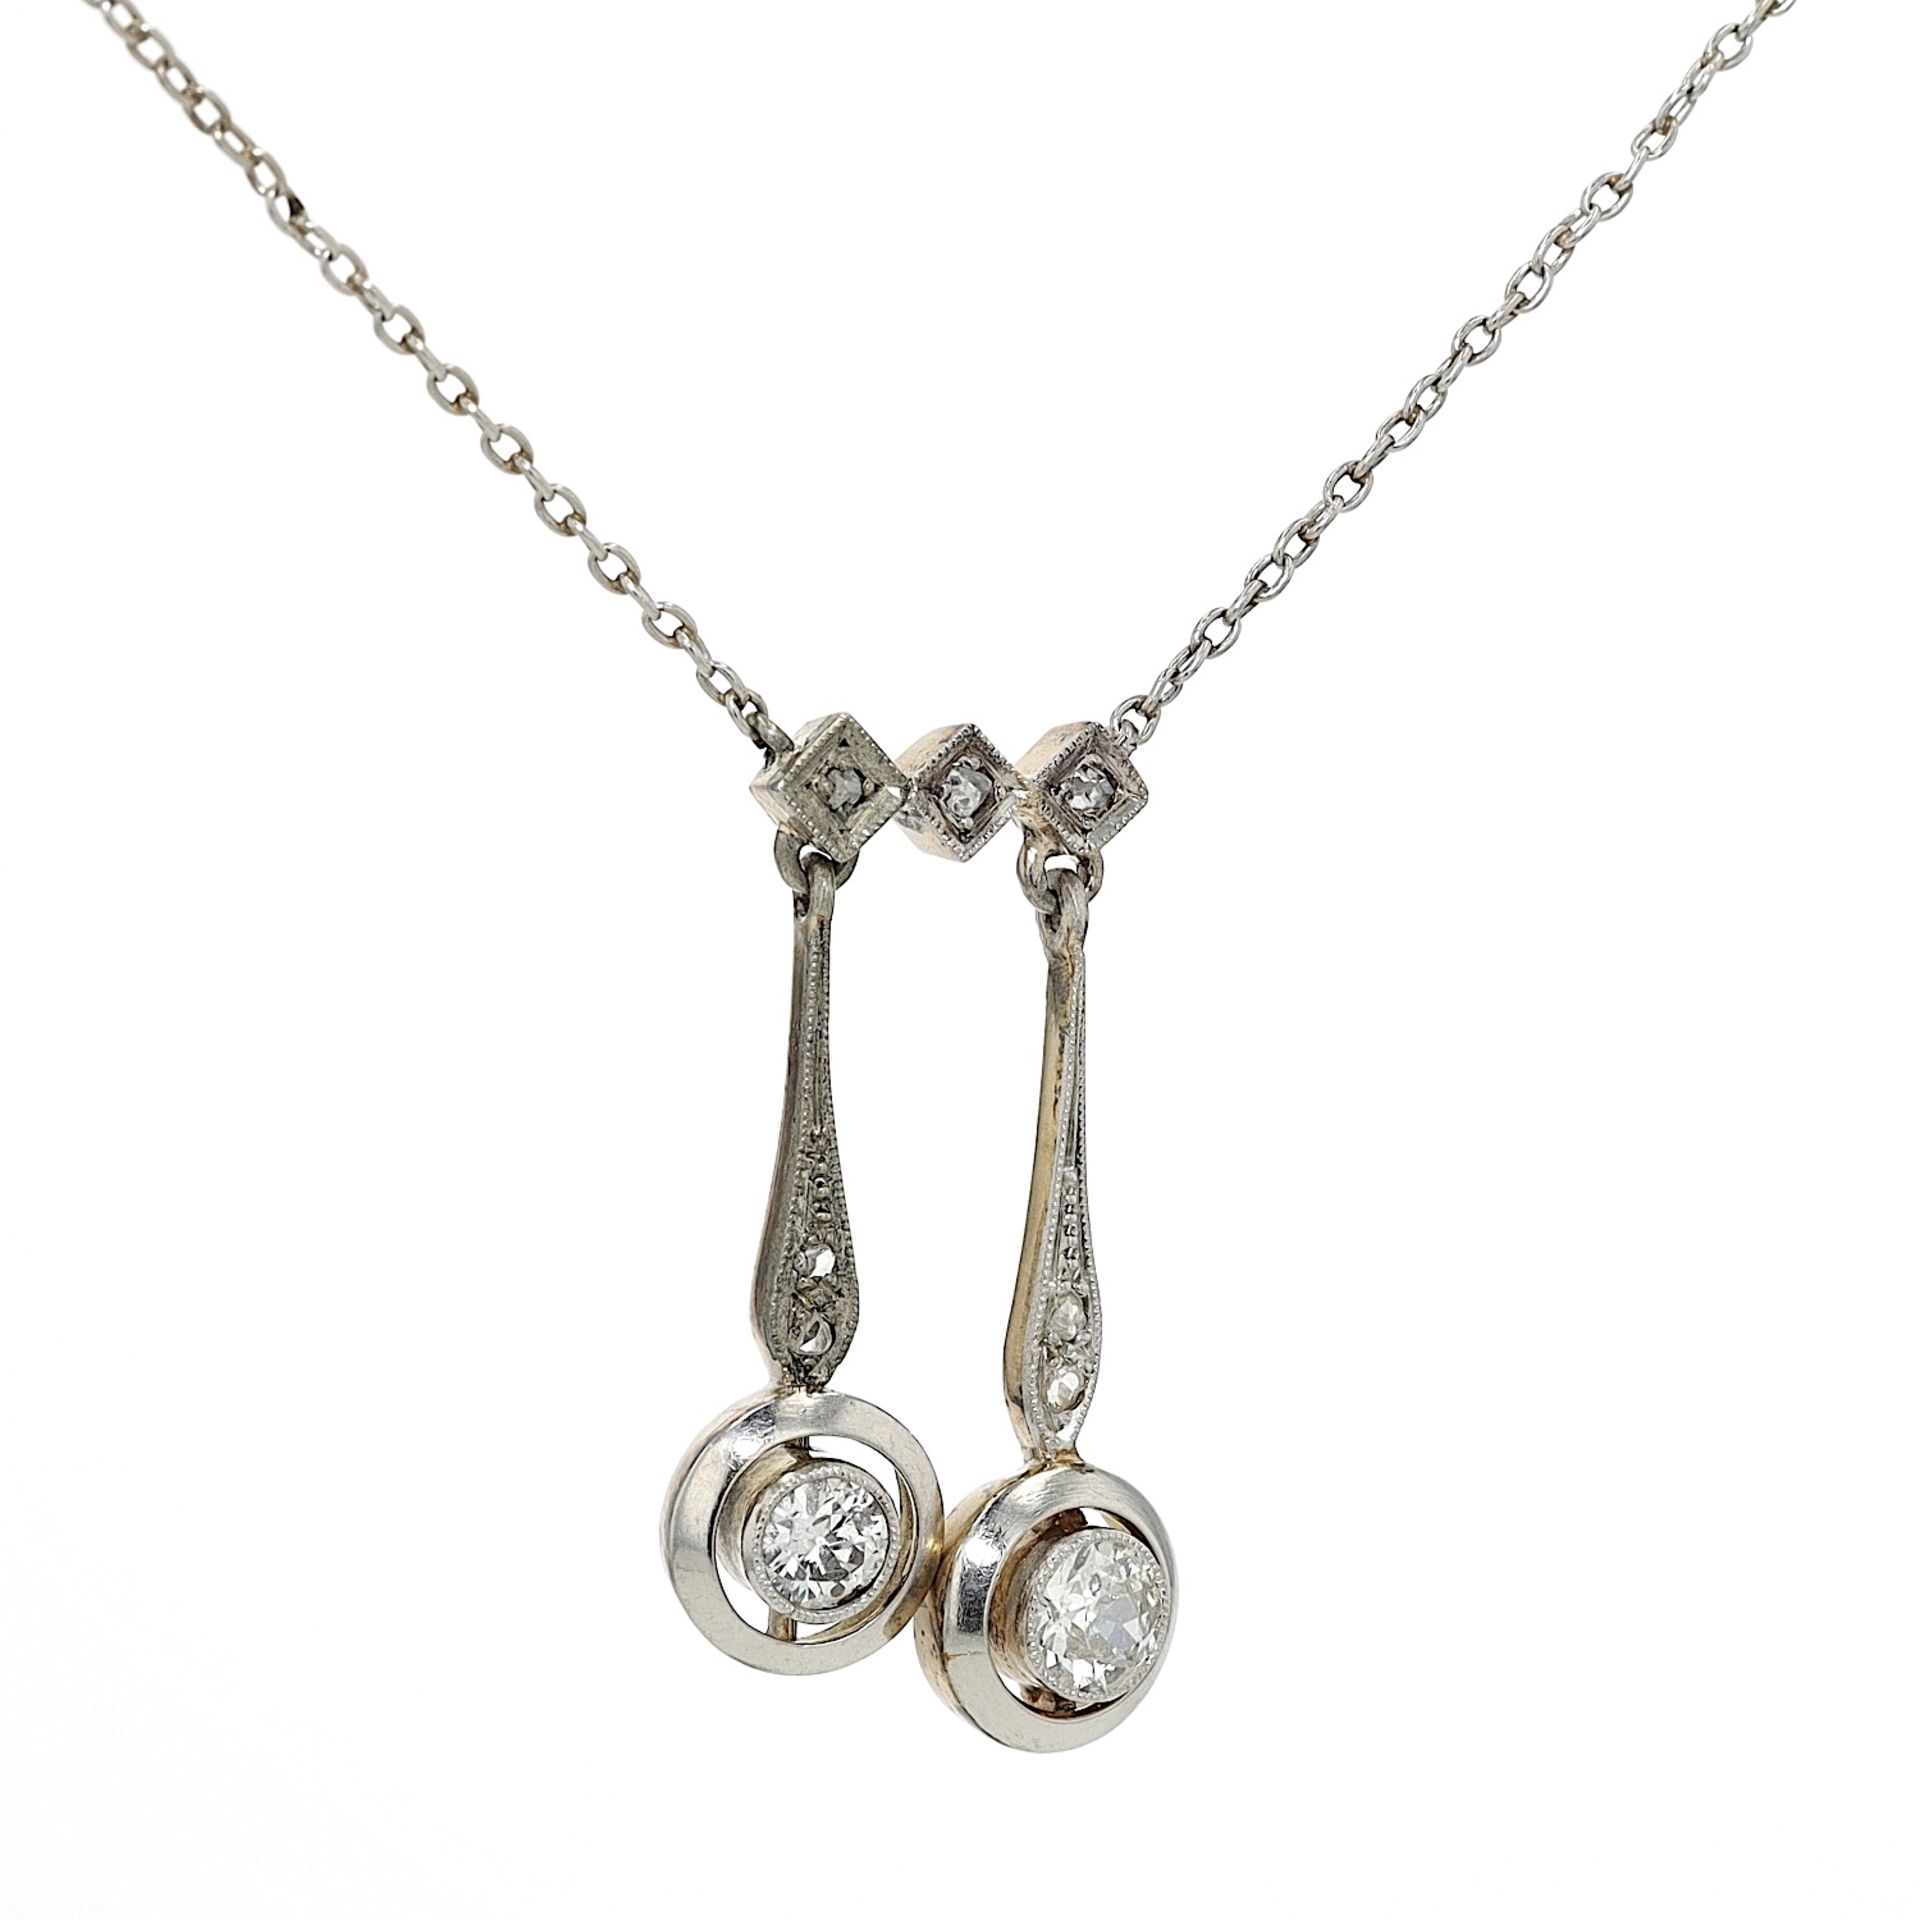 Necklace in platinum with diamonds - Image 3 of 4